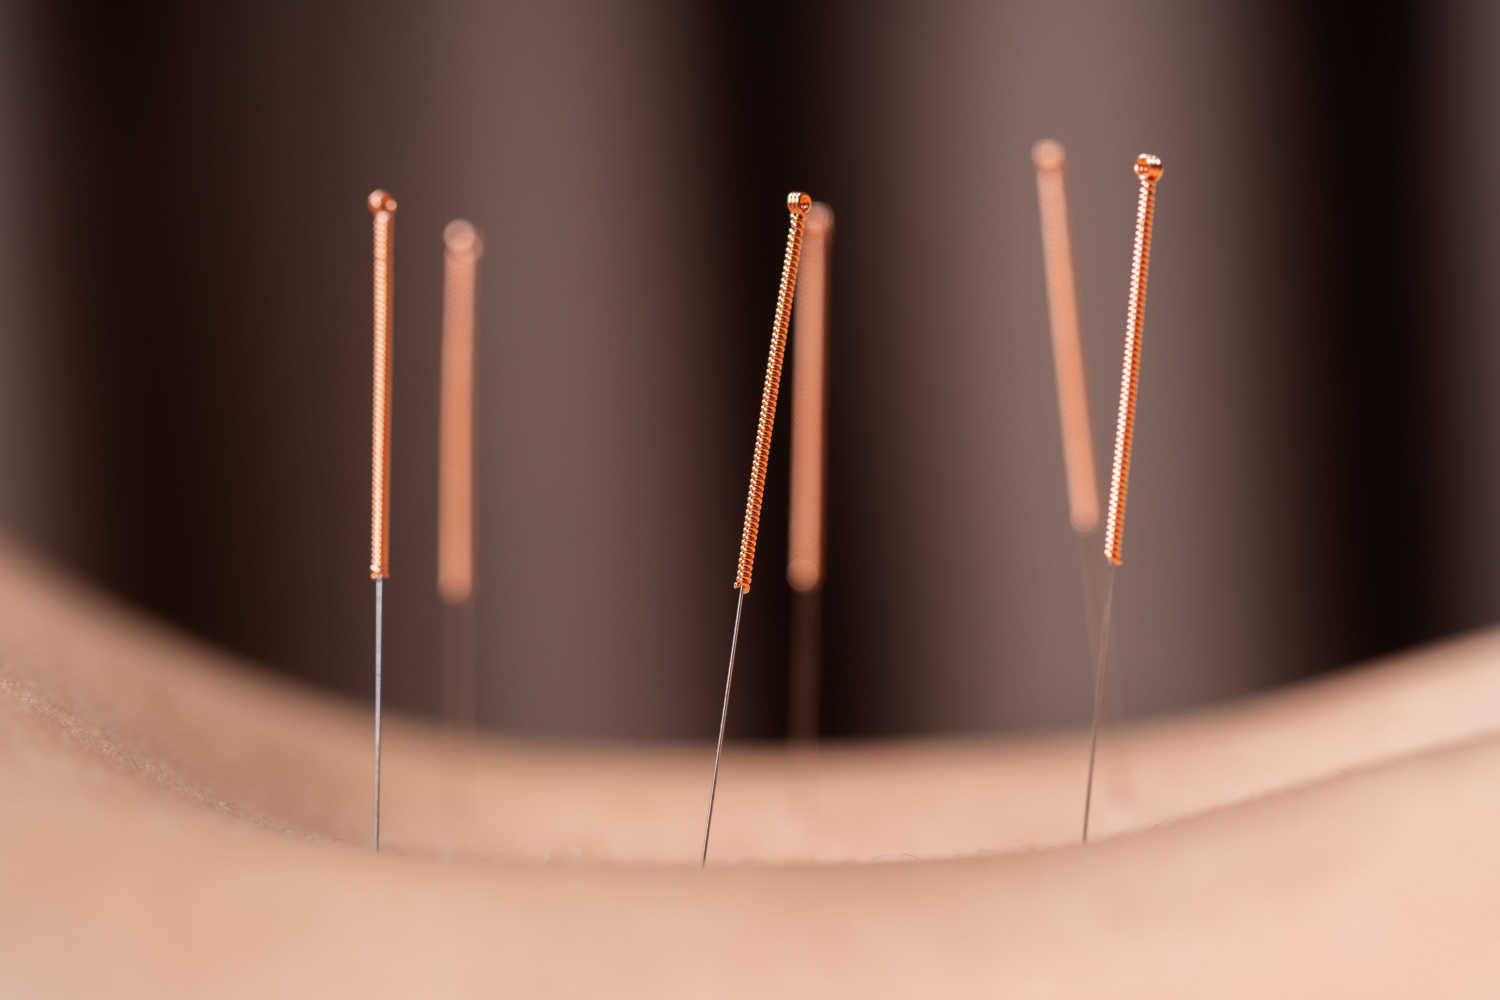 Acupuncture for fertility